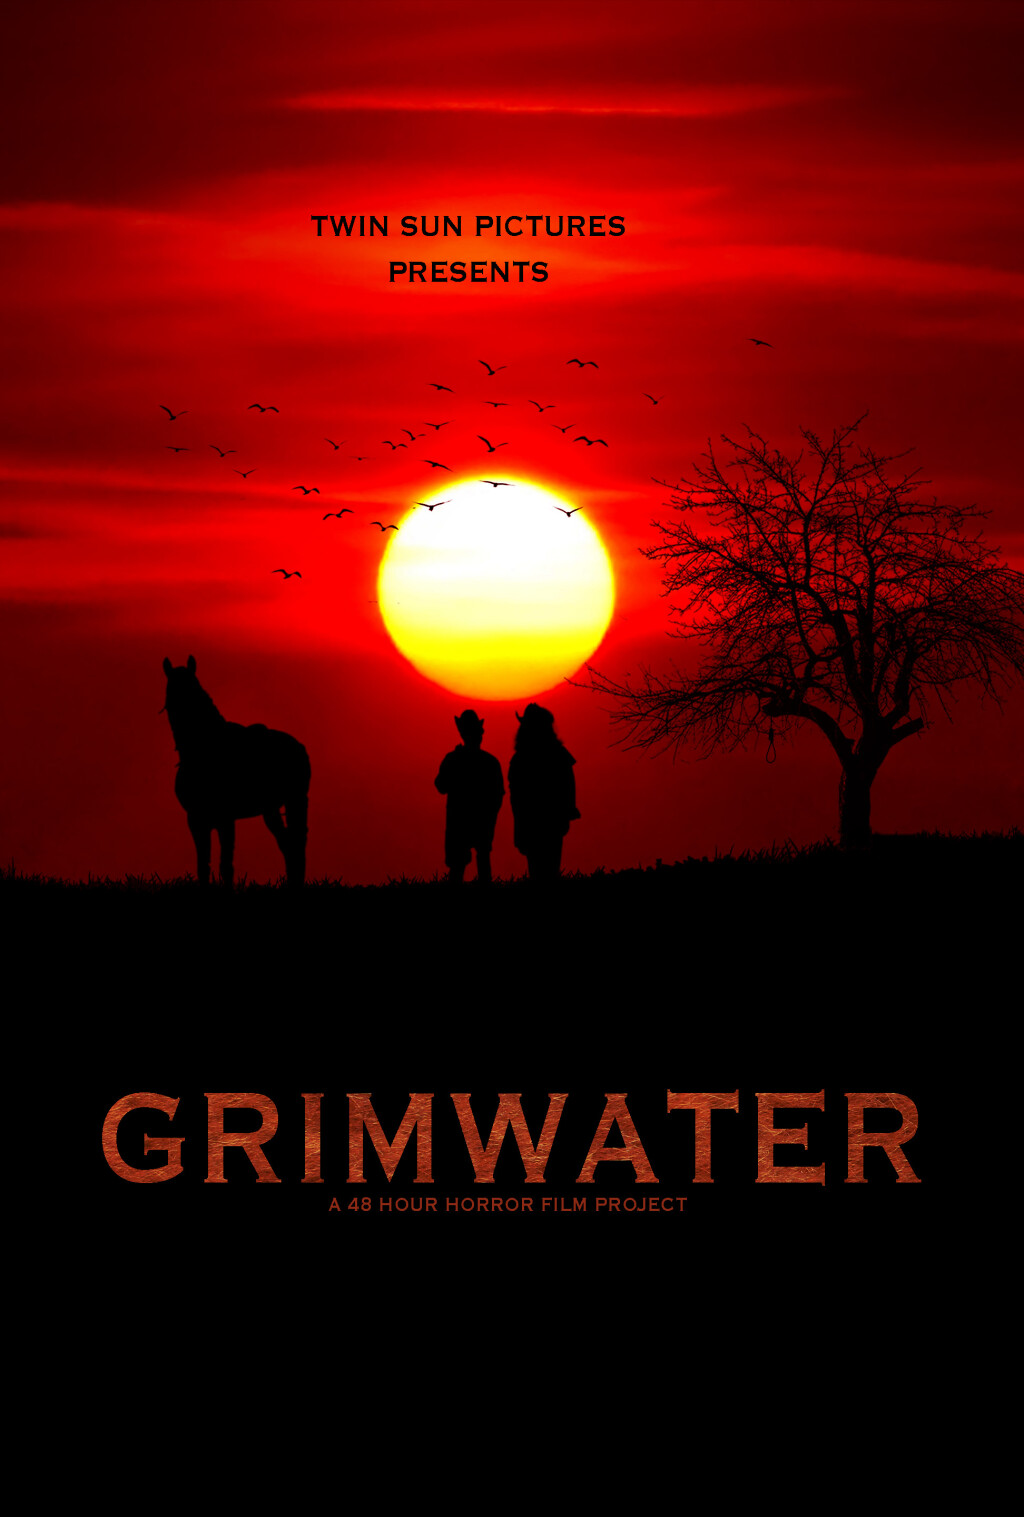 Filmposter for Grimwater